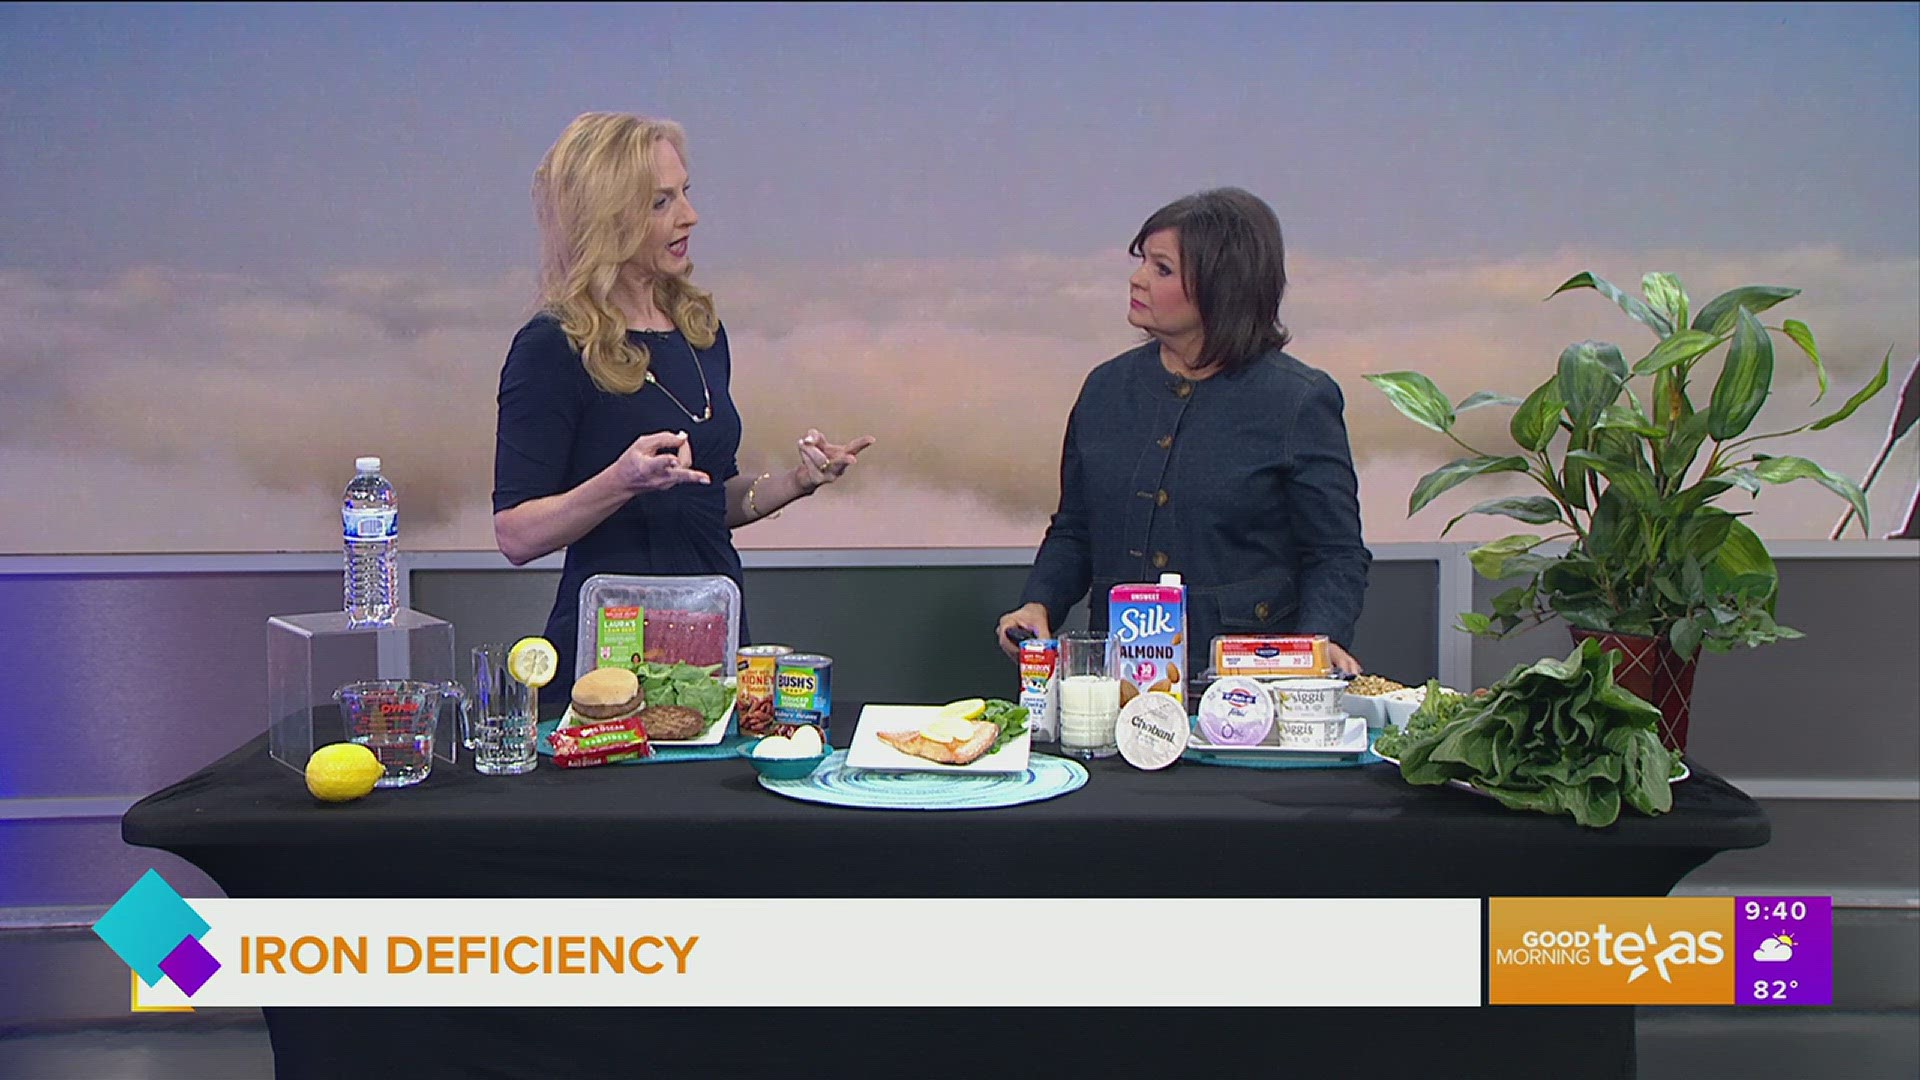 Registered Dietitian Nutritionist Meridan Zerner of Cooper Clinic breaks down what foods to eat to combat five of the most common vitamin deficiencies